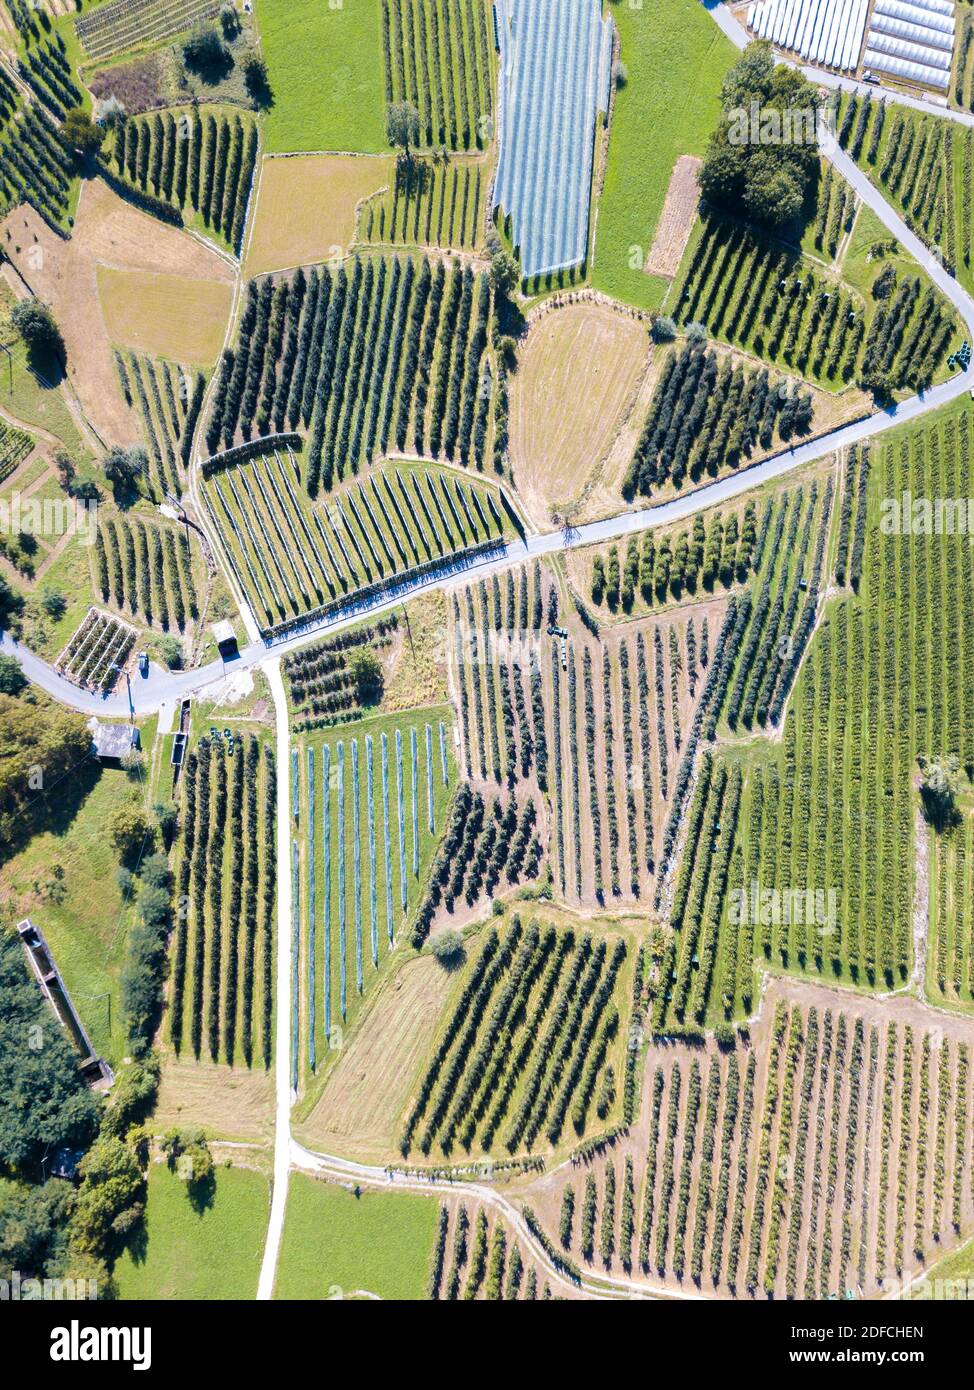 Aerial view of apple orchards and cultivated fields, Valtellina, Sondrio province, Lombardy, Italy Stock Photo